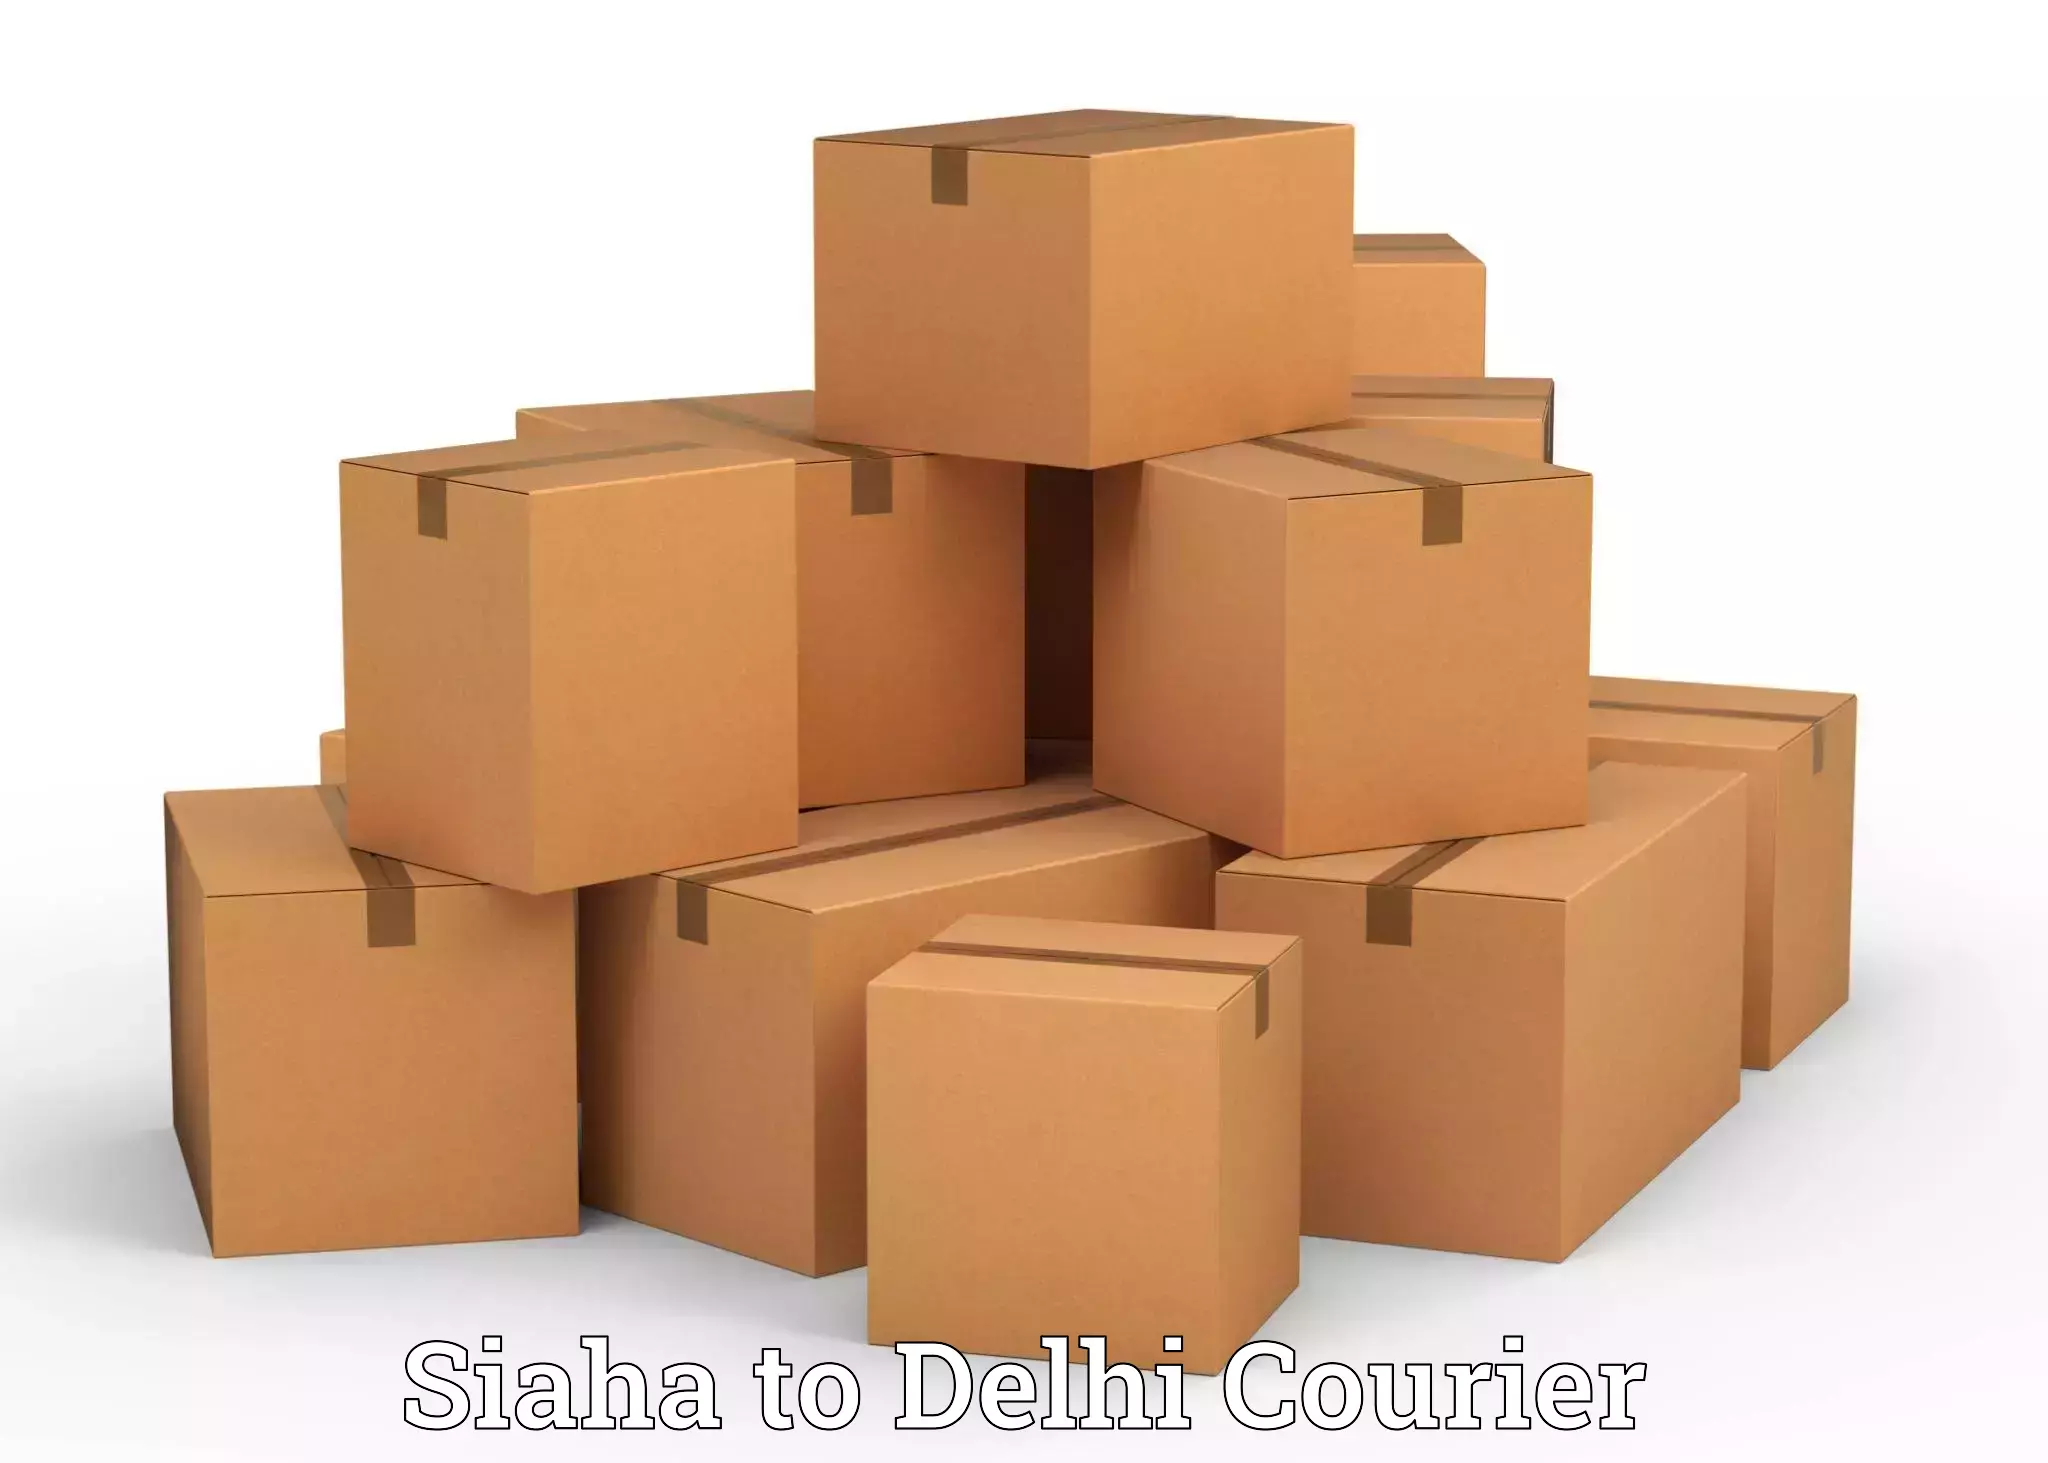 Residential furniture movers Siaha to Delhi